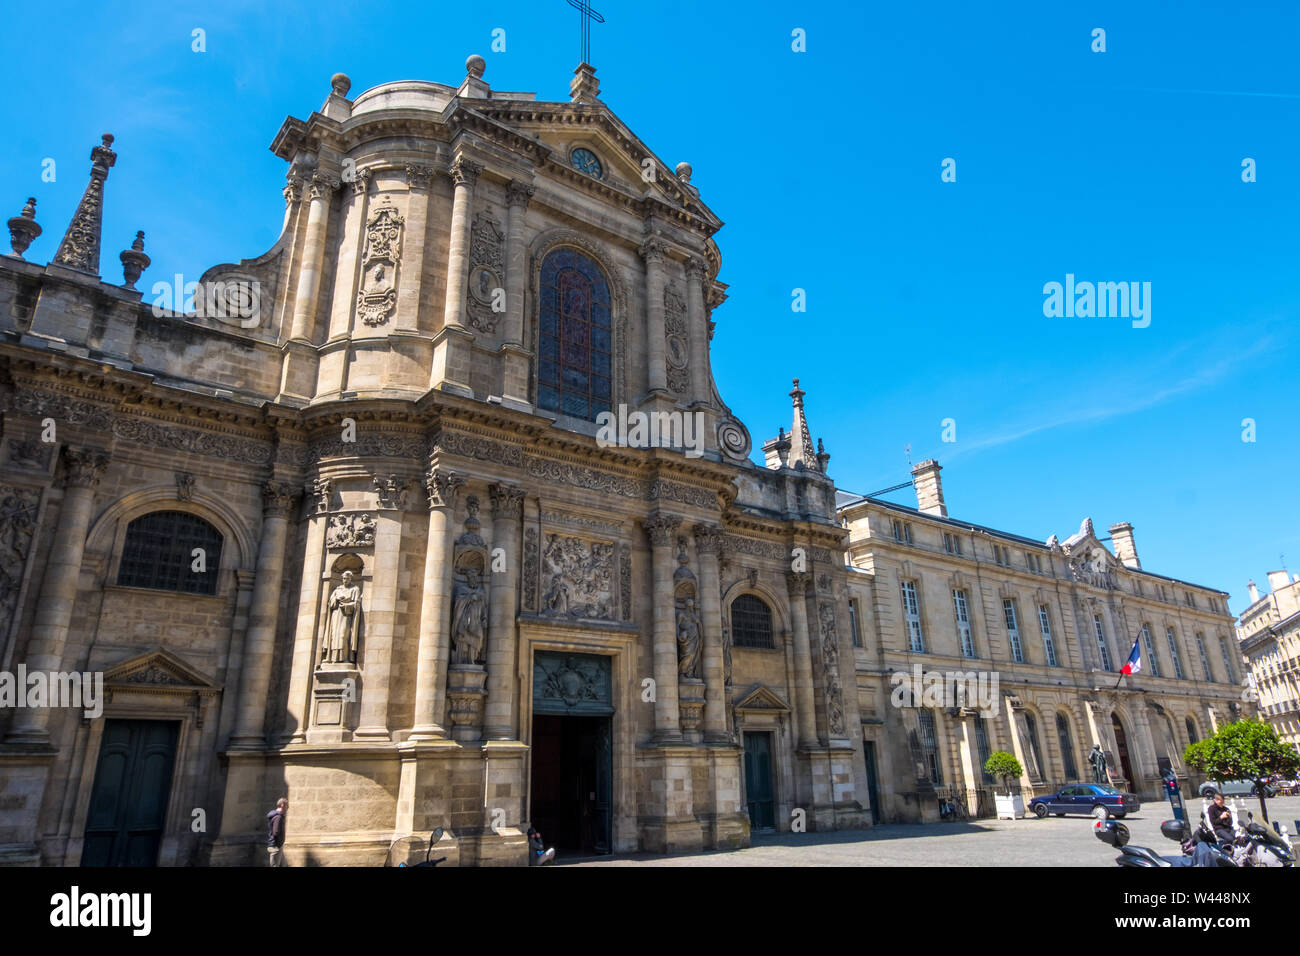 Bordeaux, France - May 6, 2019 : Church of Notre-Dame in Bordeaux, Aquitaine France Stock Photo